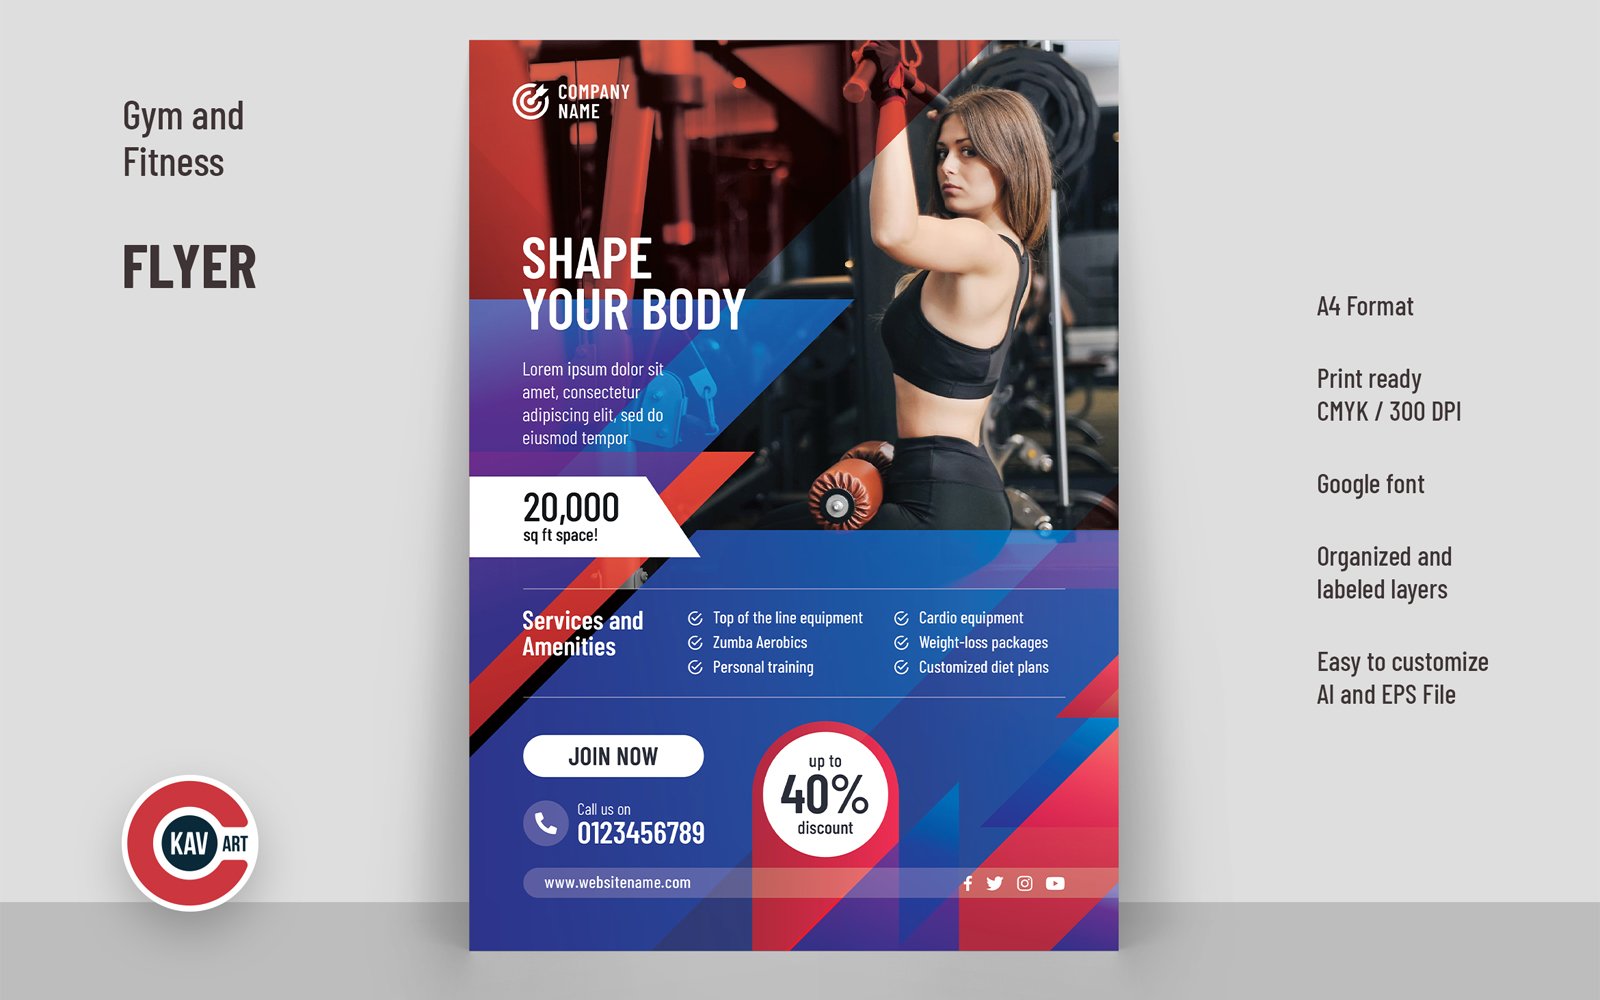 Gym and Fitness Flyer or Poster Template - 00217